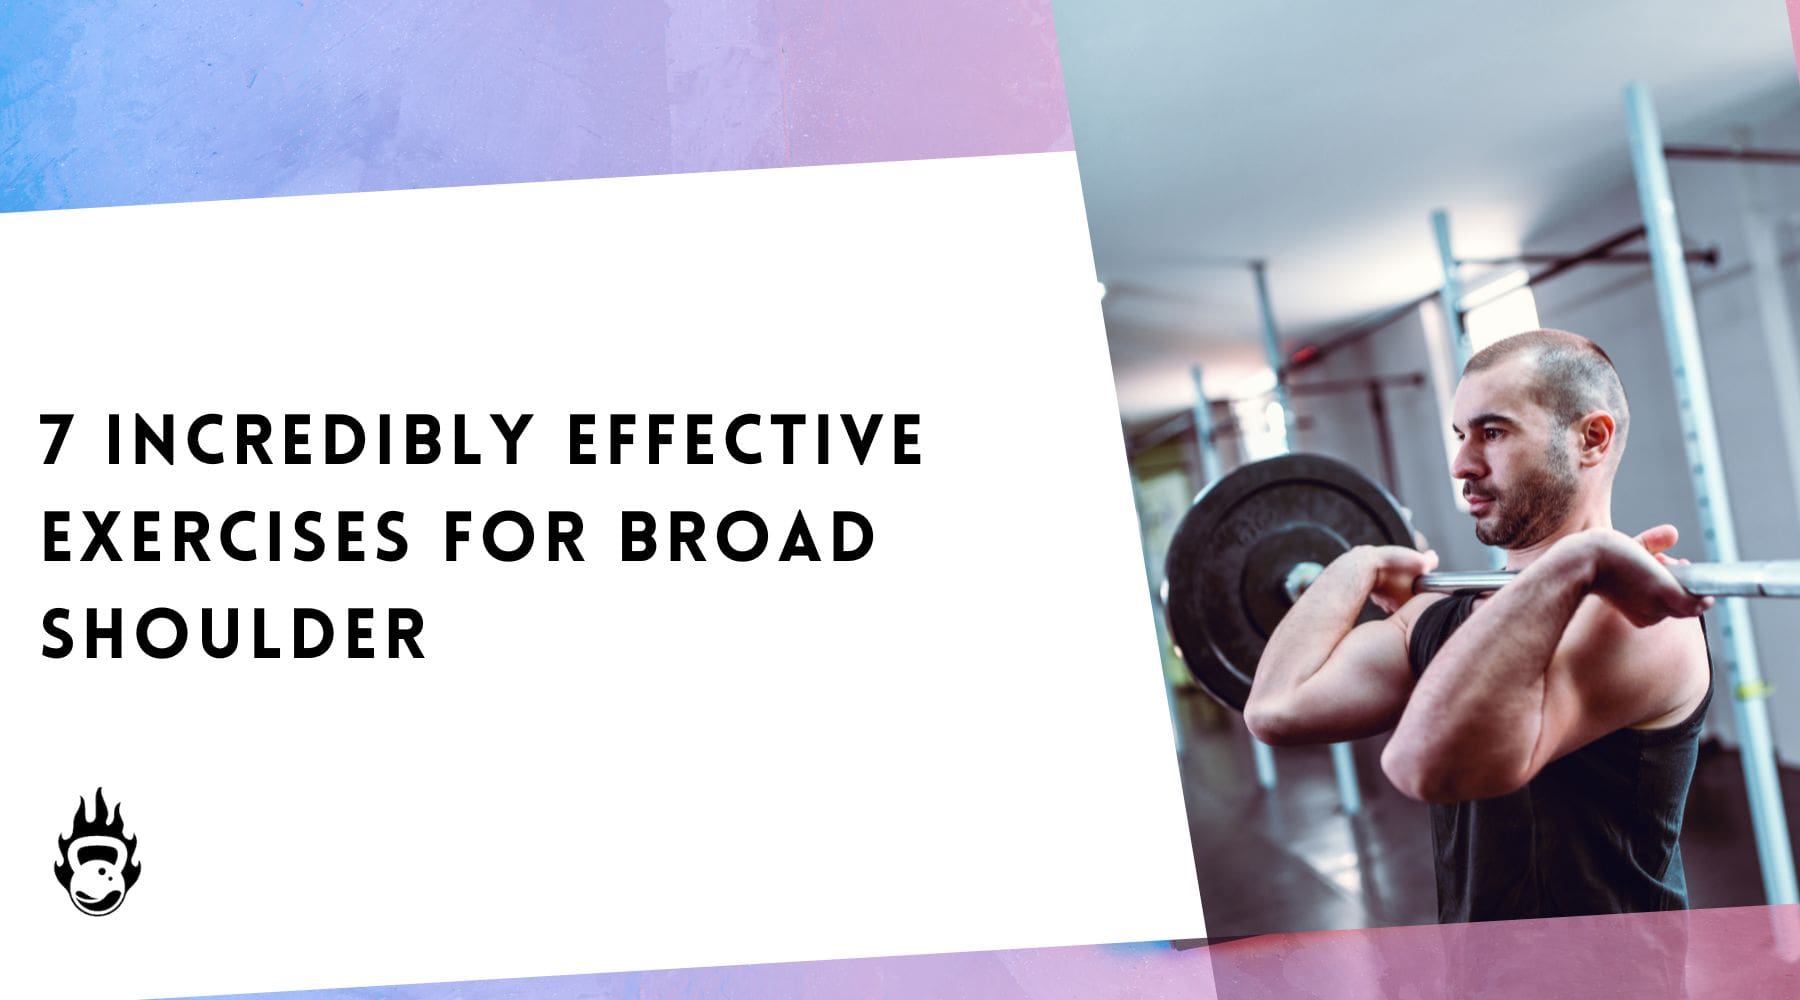 Want Wider Shoulders? The Three Most Effective Methods to Increase